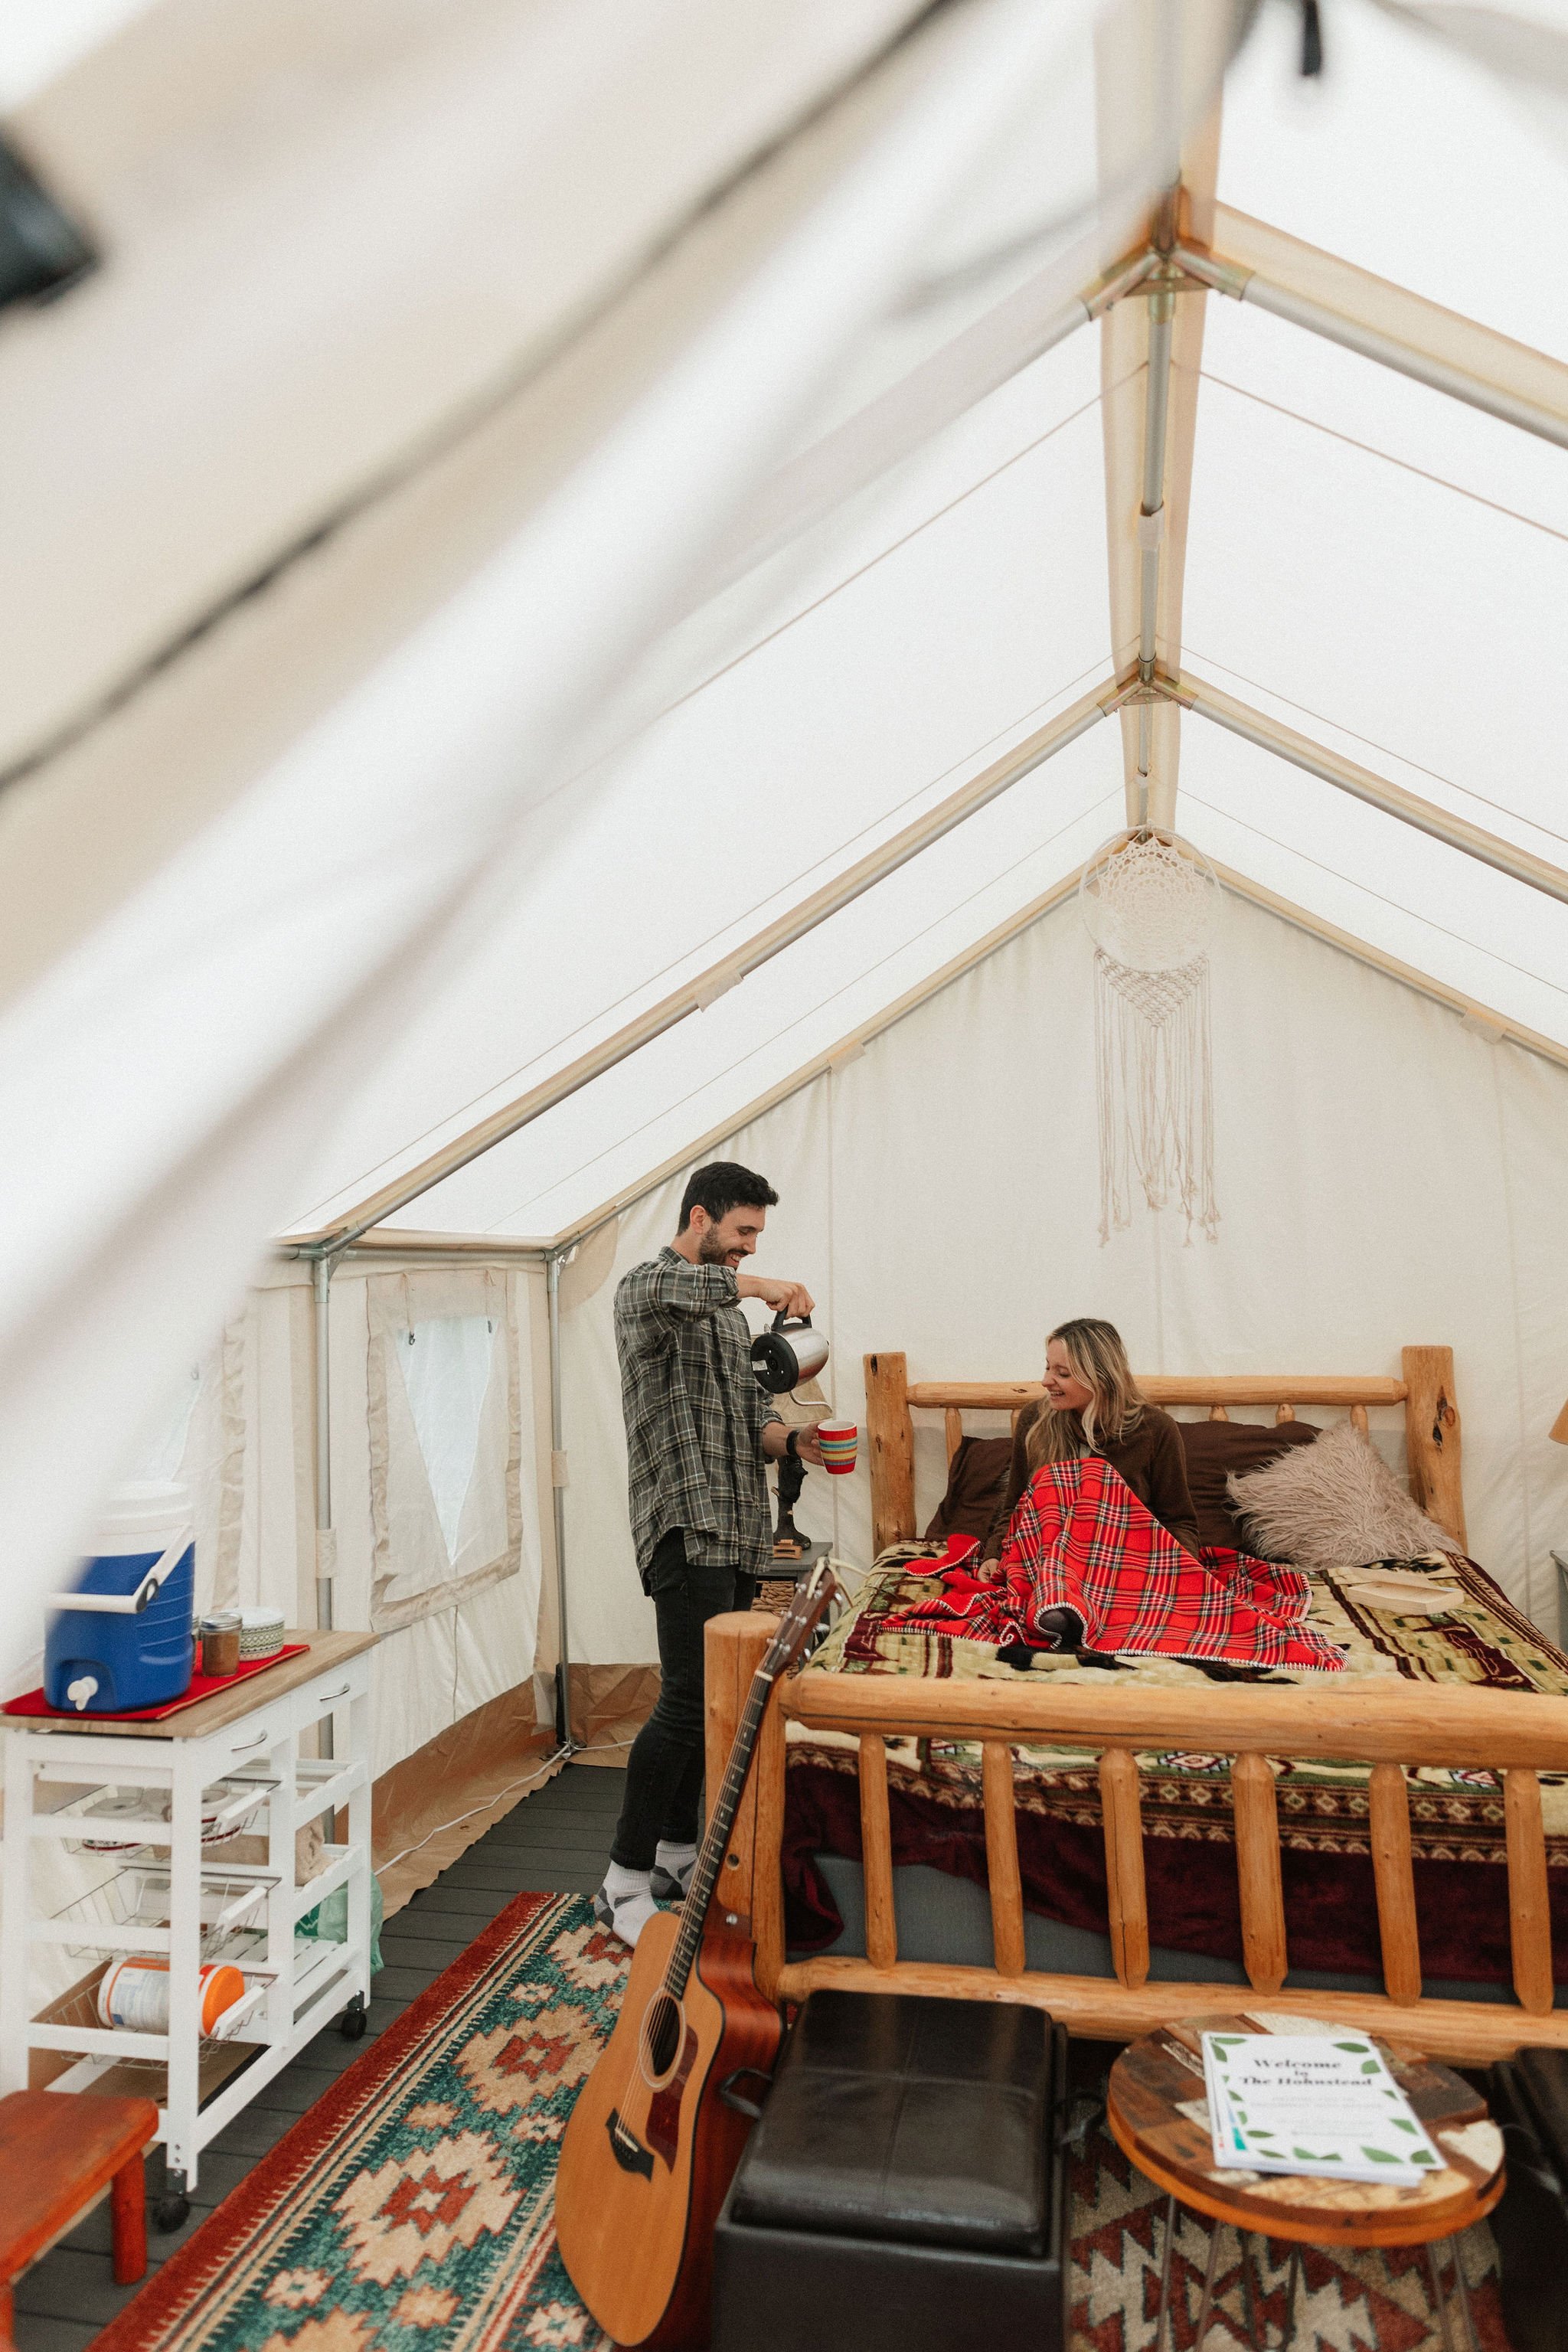 A romantic getaway weekend awaits at The Ranch Hand Glamping Tent at The Hohnstead Glamping Cabins Resort near Missoula, Montana